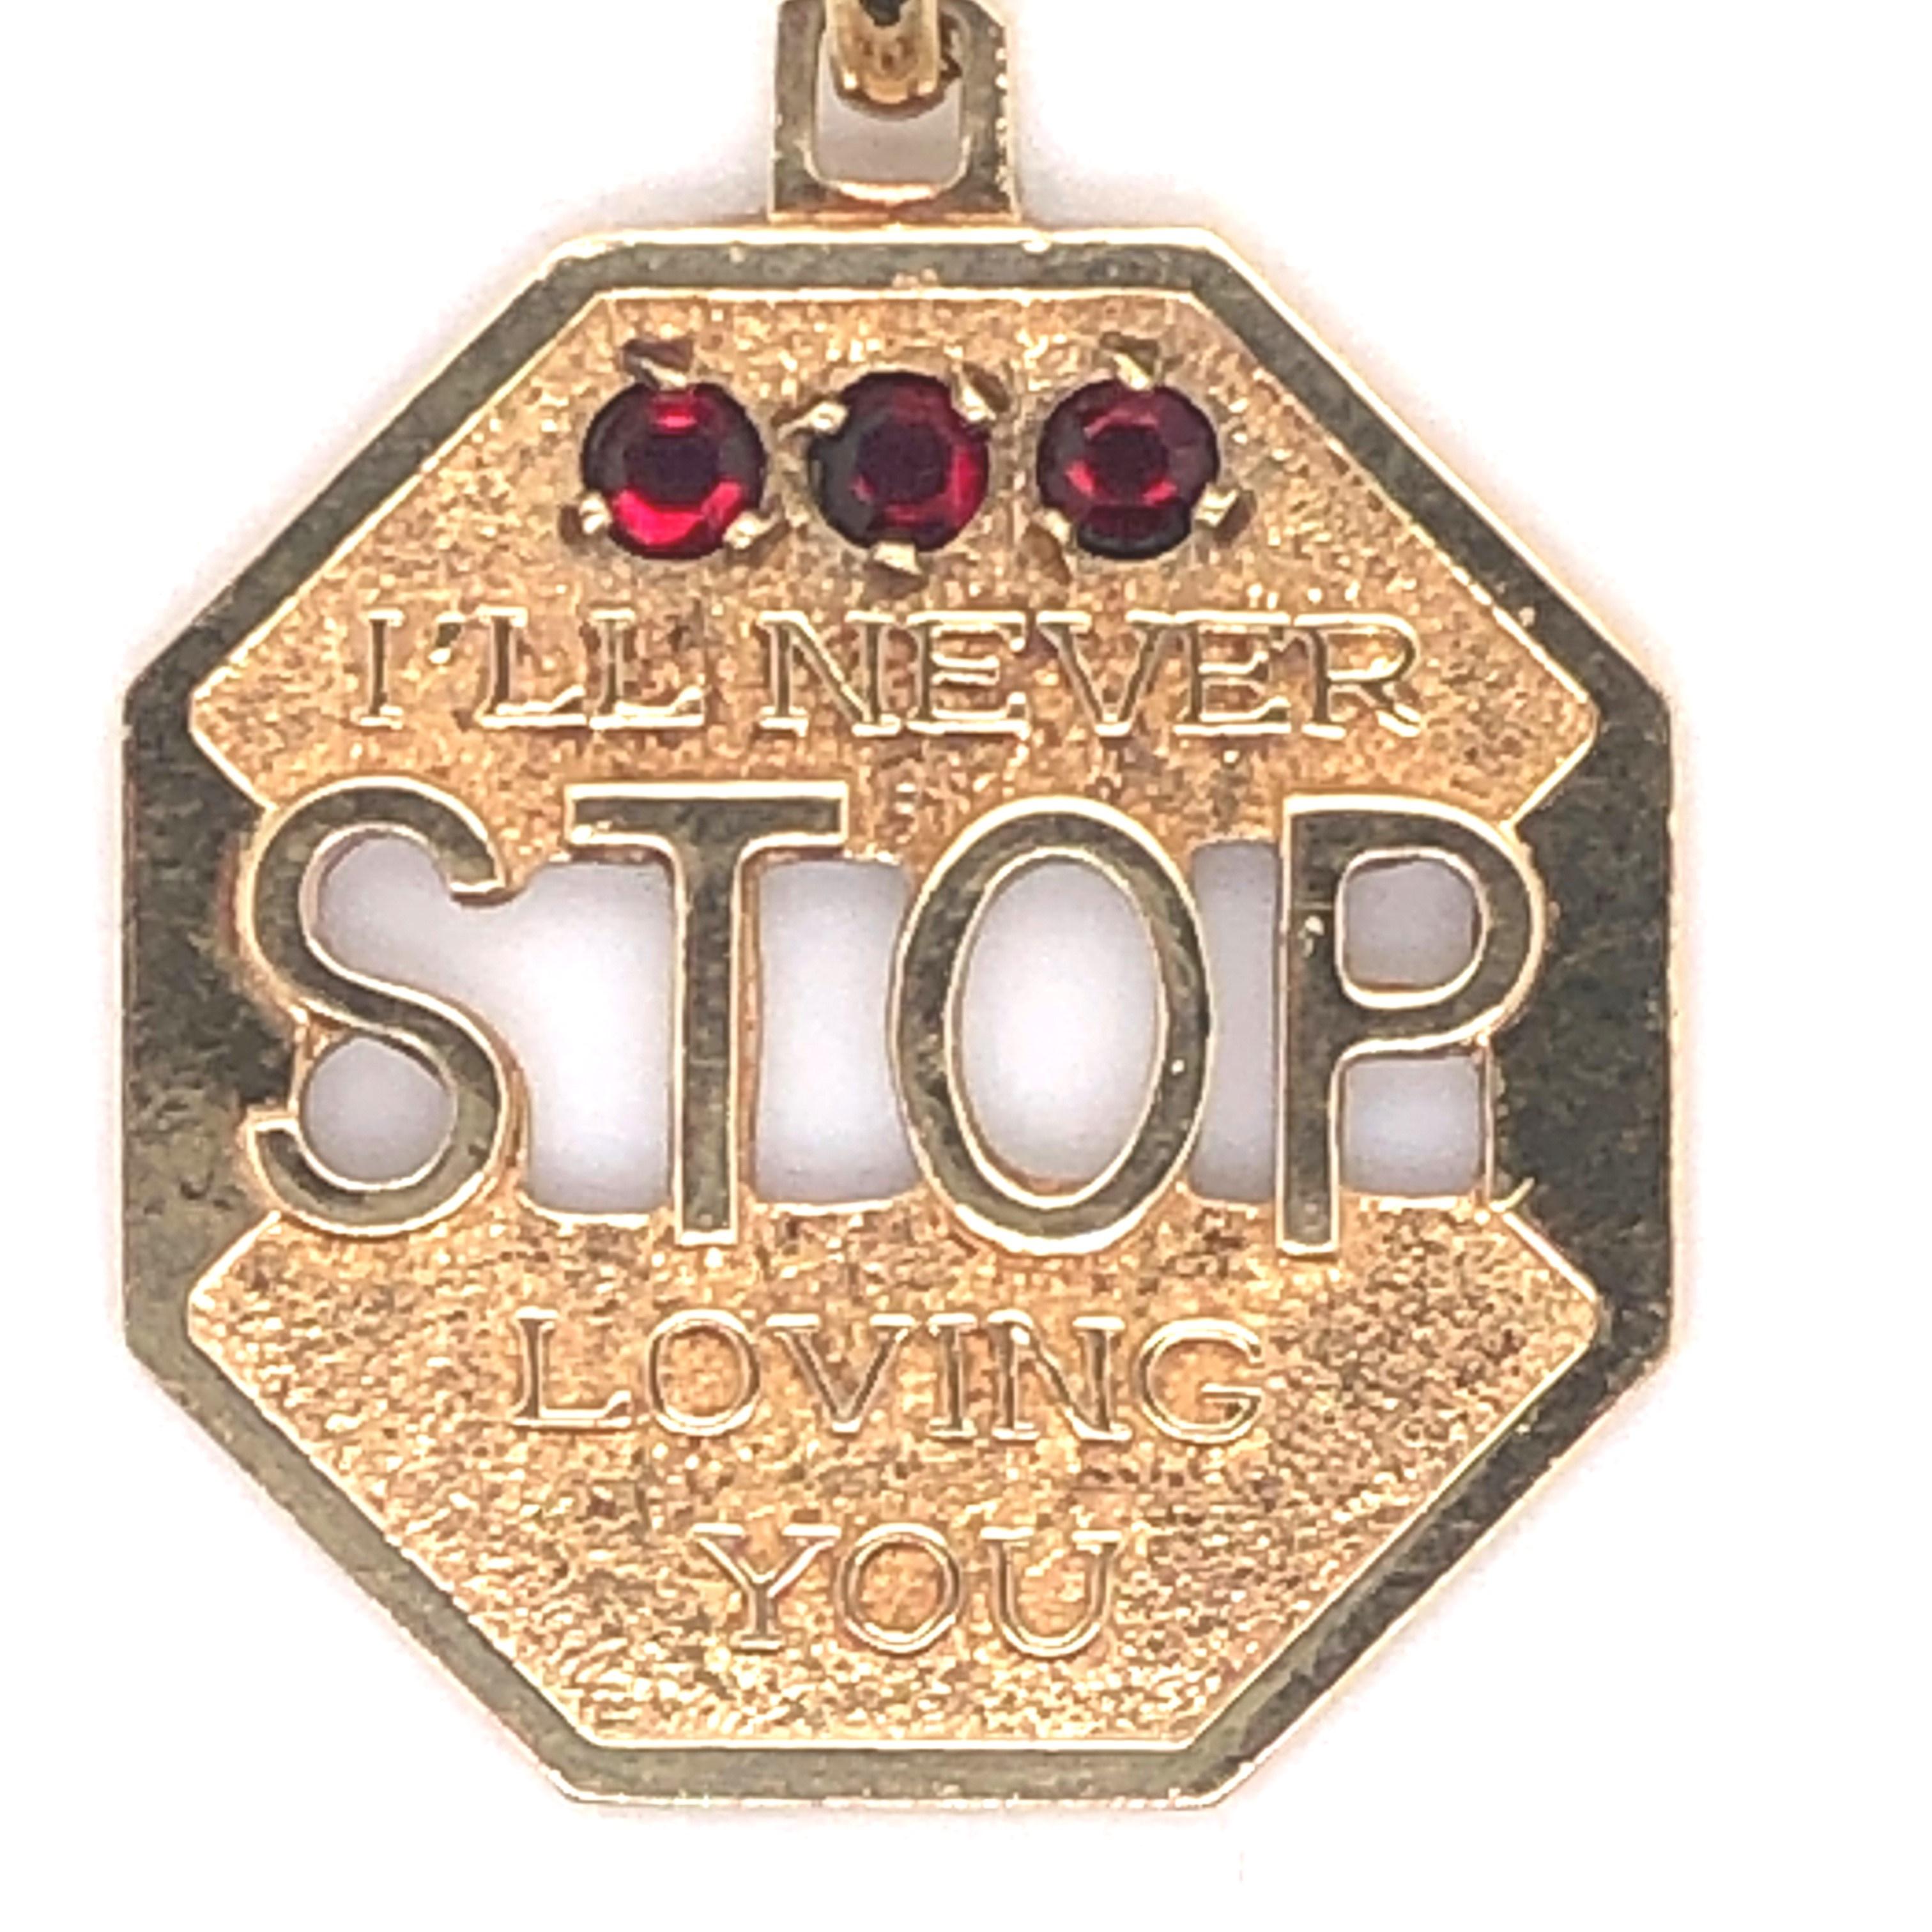 14kt yellow gold octagonal charm shaped like a stop sign with the words 